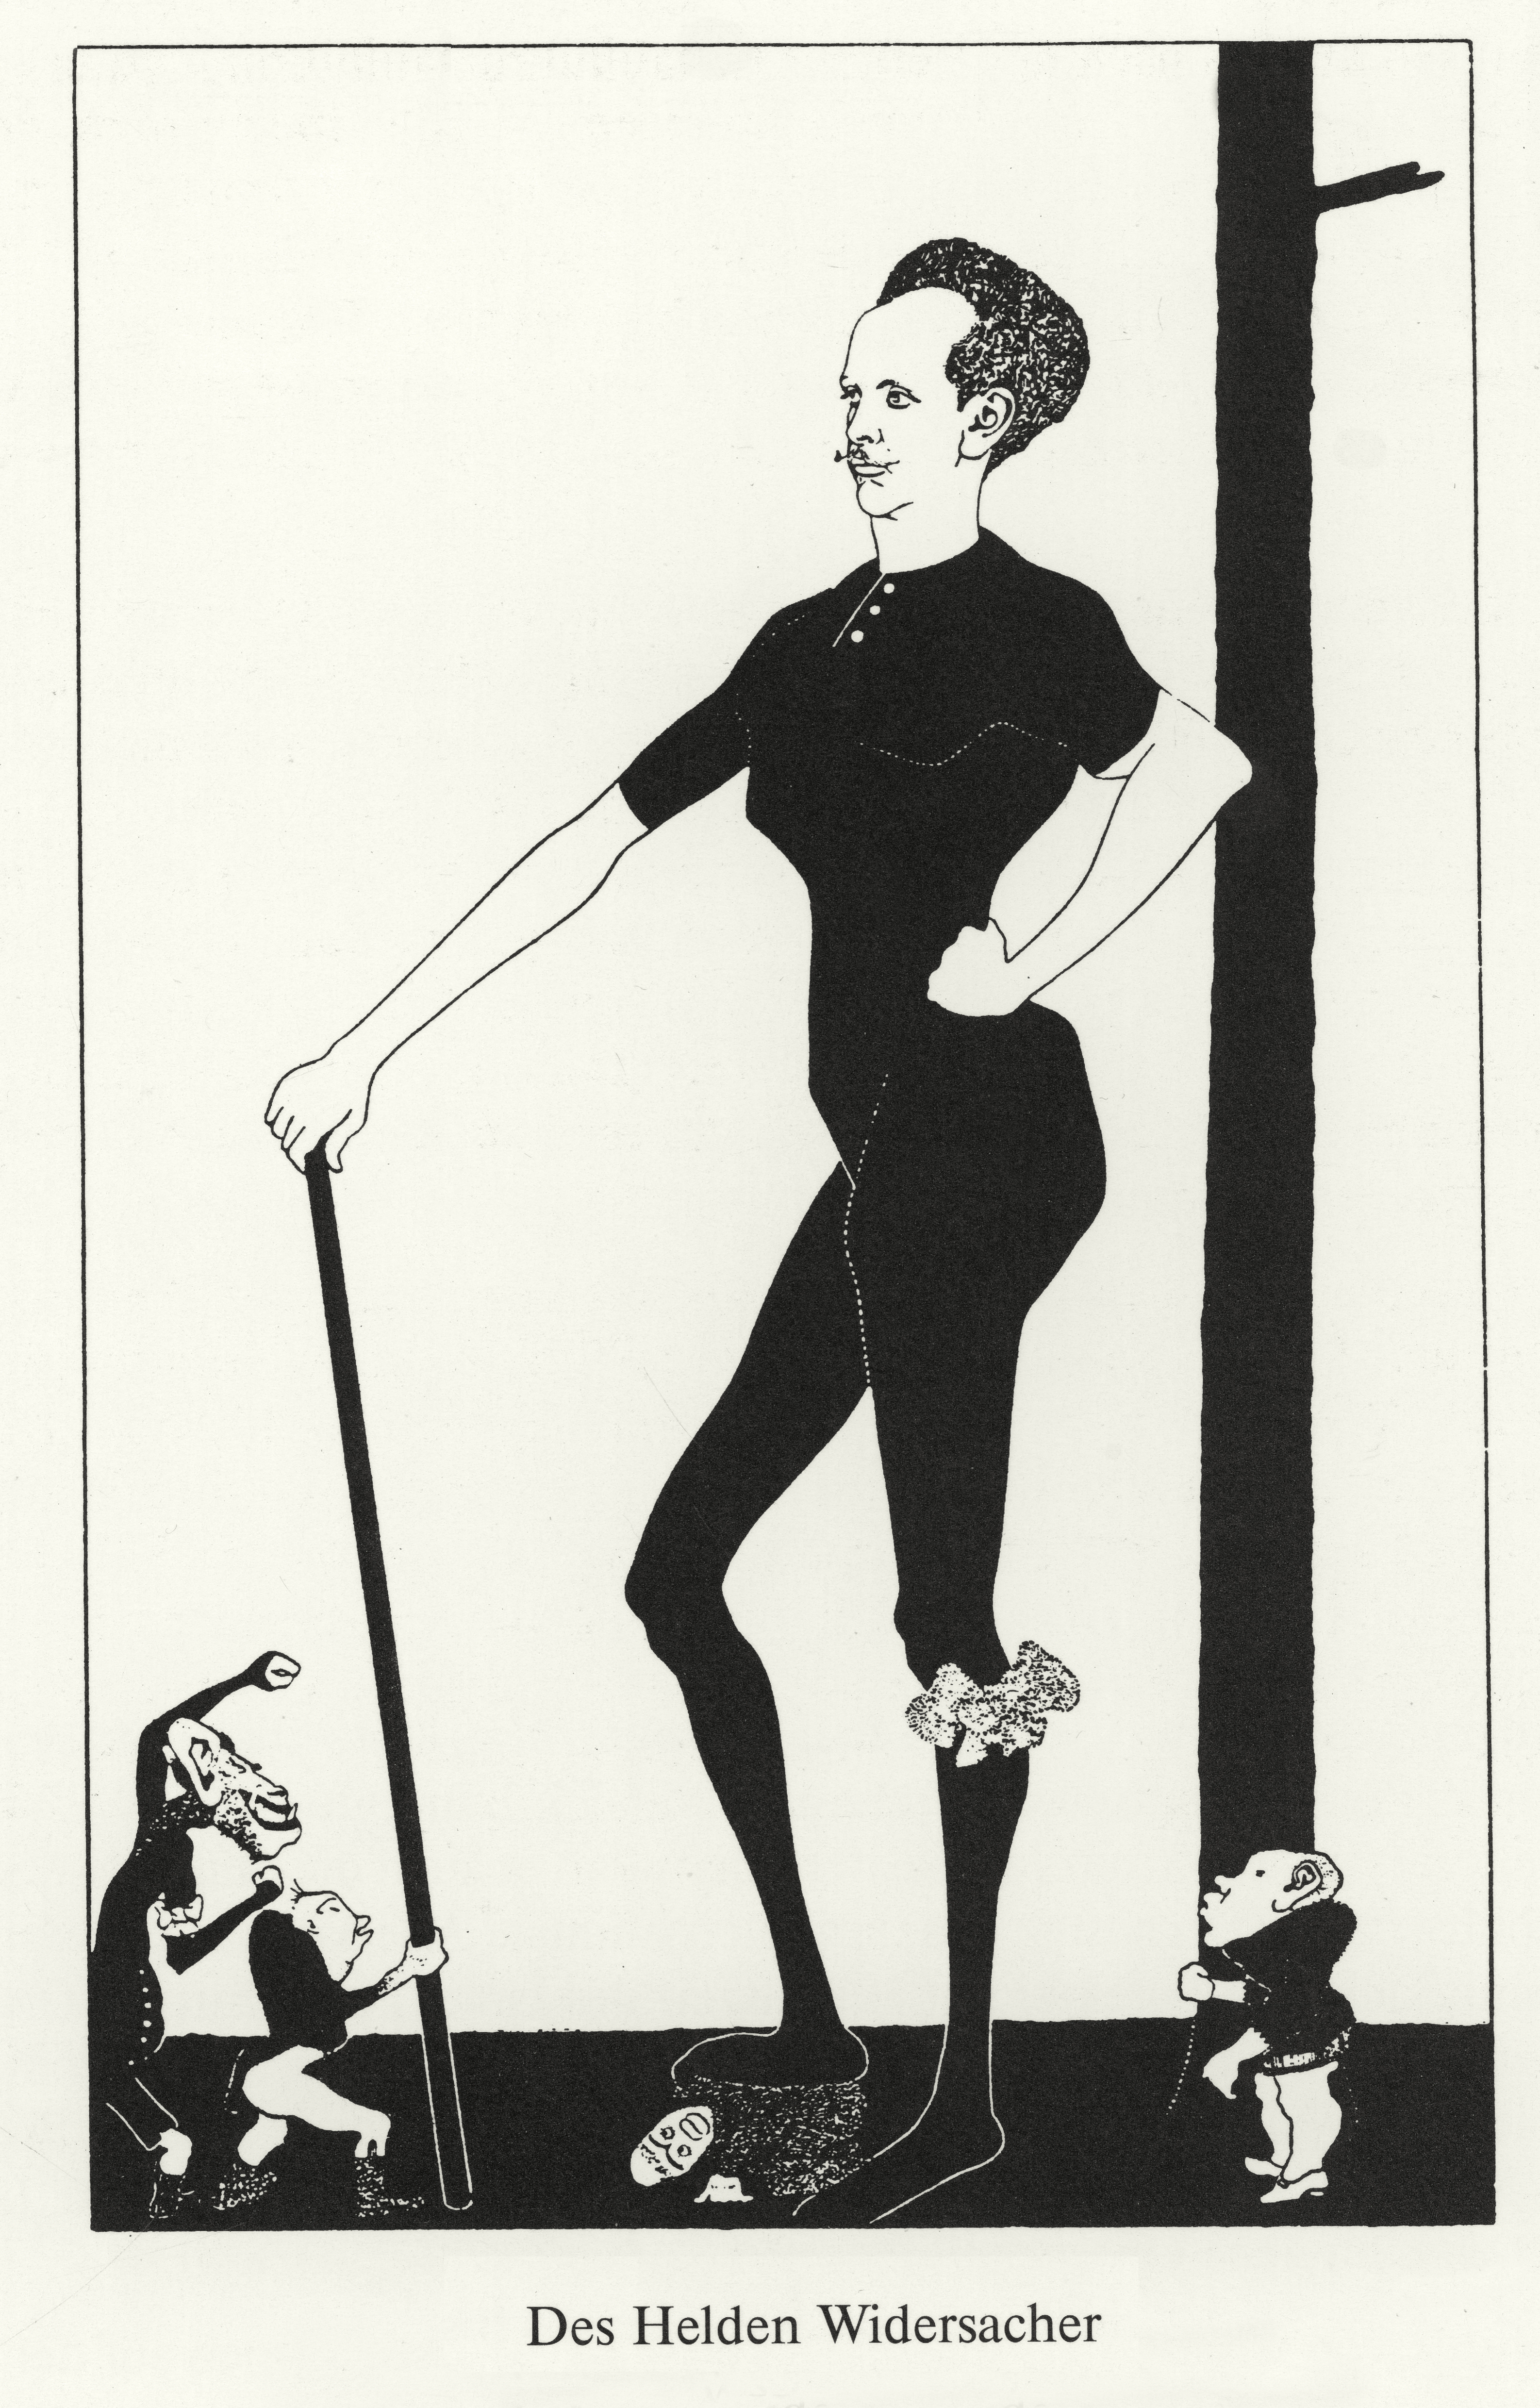 Drawing of an oversized Richard Strauss with garter and walking stick, little men around him